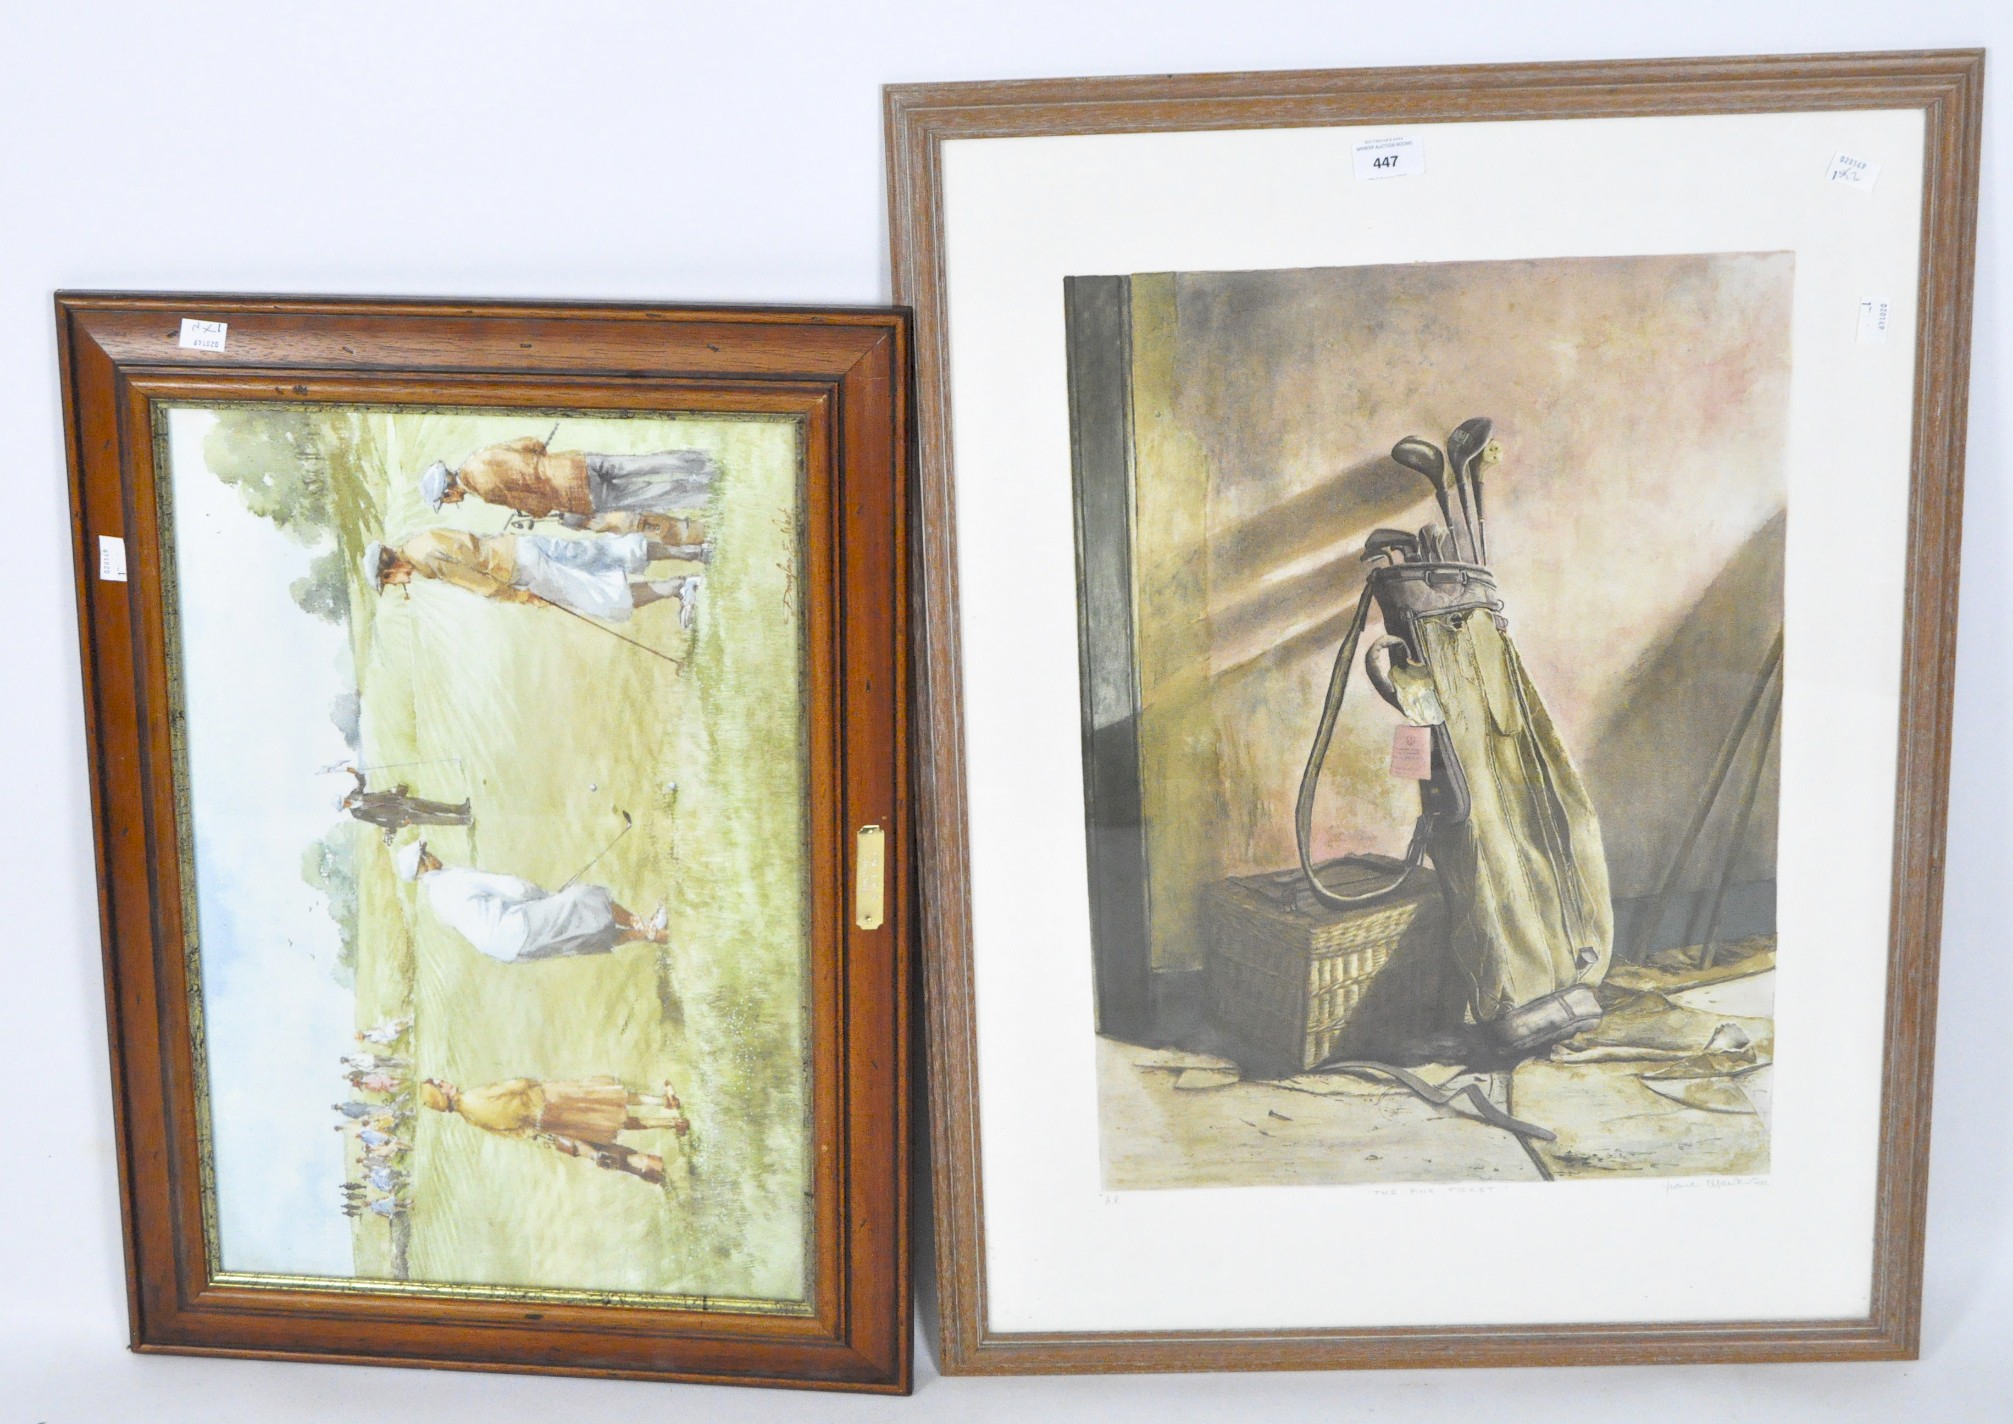 Two prints depicting golfing subjects,